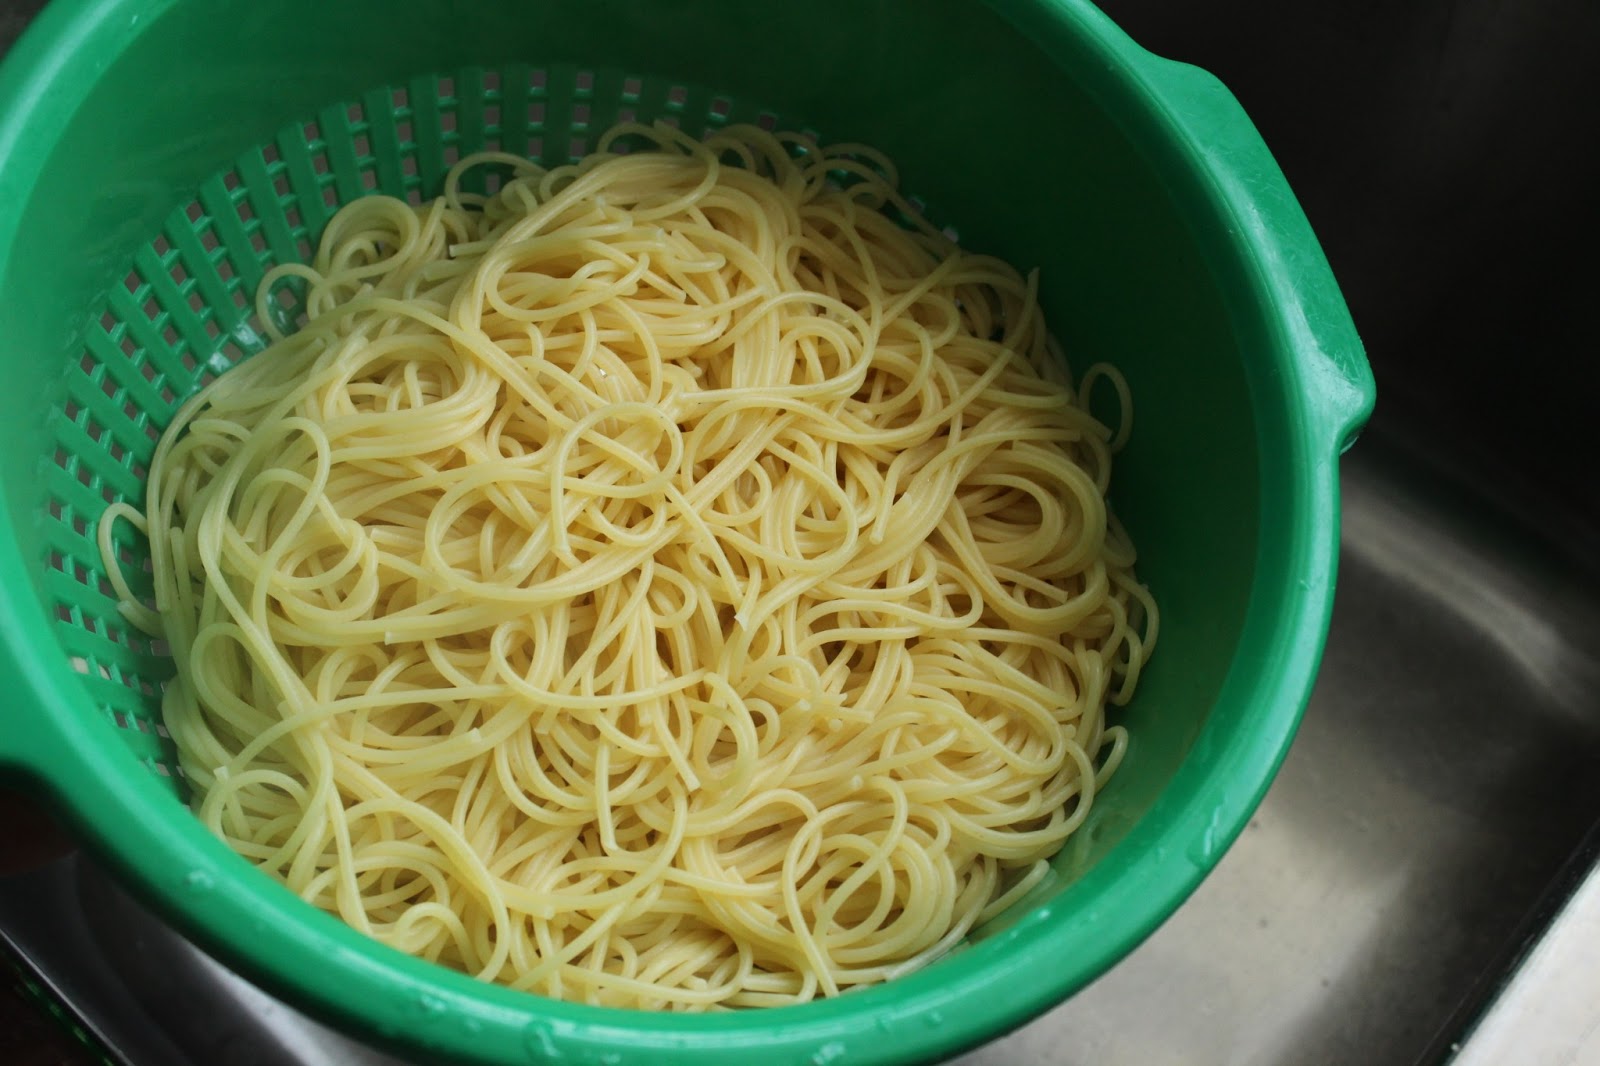 Pasta ready in one minute. - More Clever Kitchen Solutions and Life Hacks